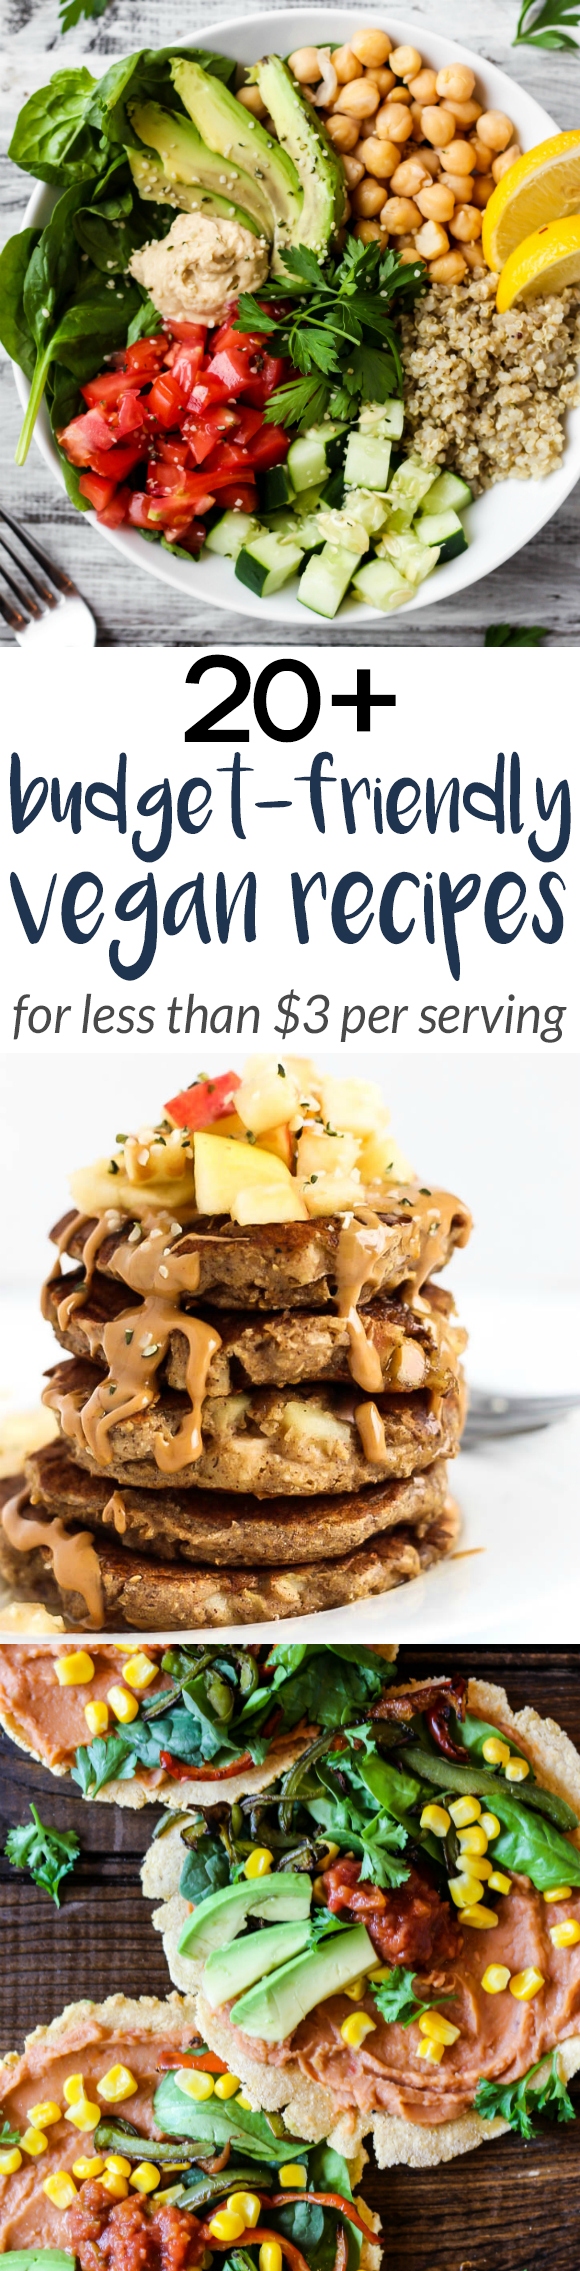 Looking for healthy, budget-friendly meals? "Vegan on a Budget" contains 20+ vegan meals, snacks & desserts for $3 or less per serving. It also includes money-saving tips, a two-week meal plan and grocery lists!